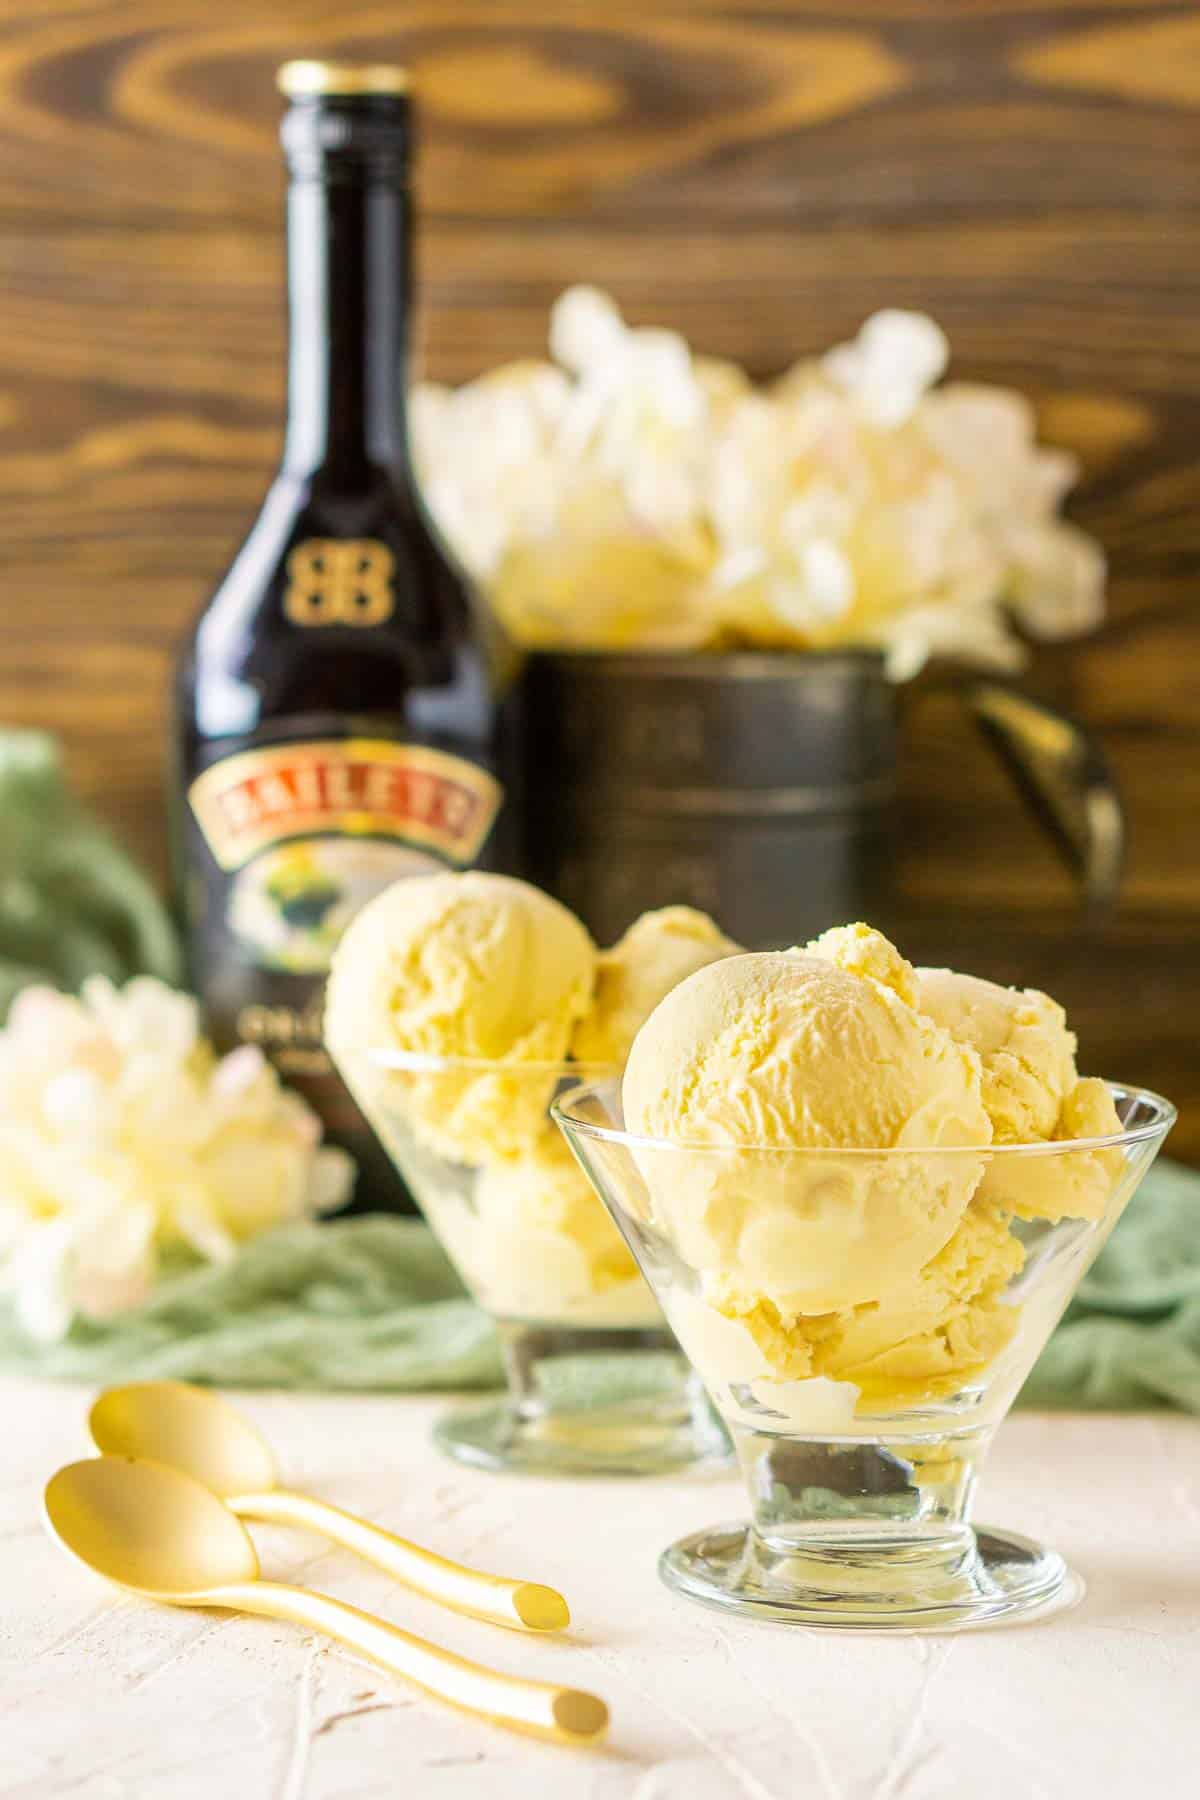 Two glass cups of Baileys ice cream with gold spoons on the side.